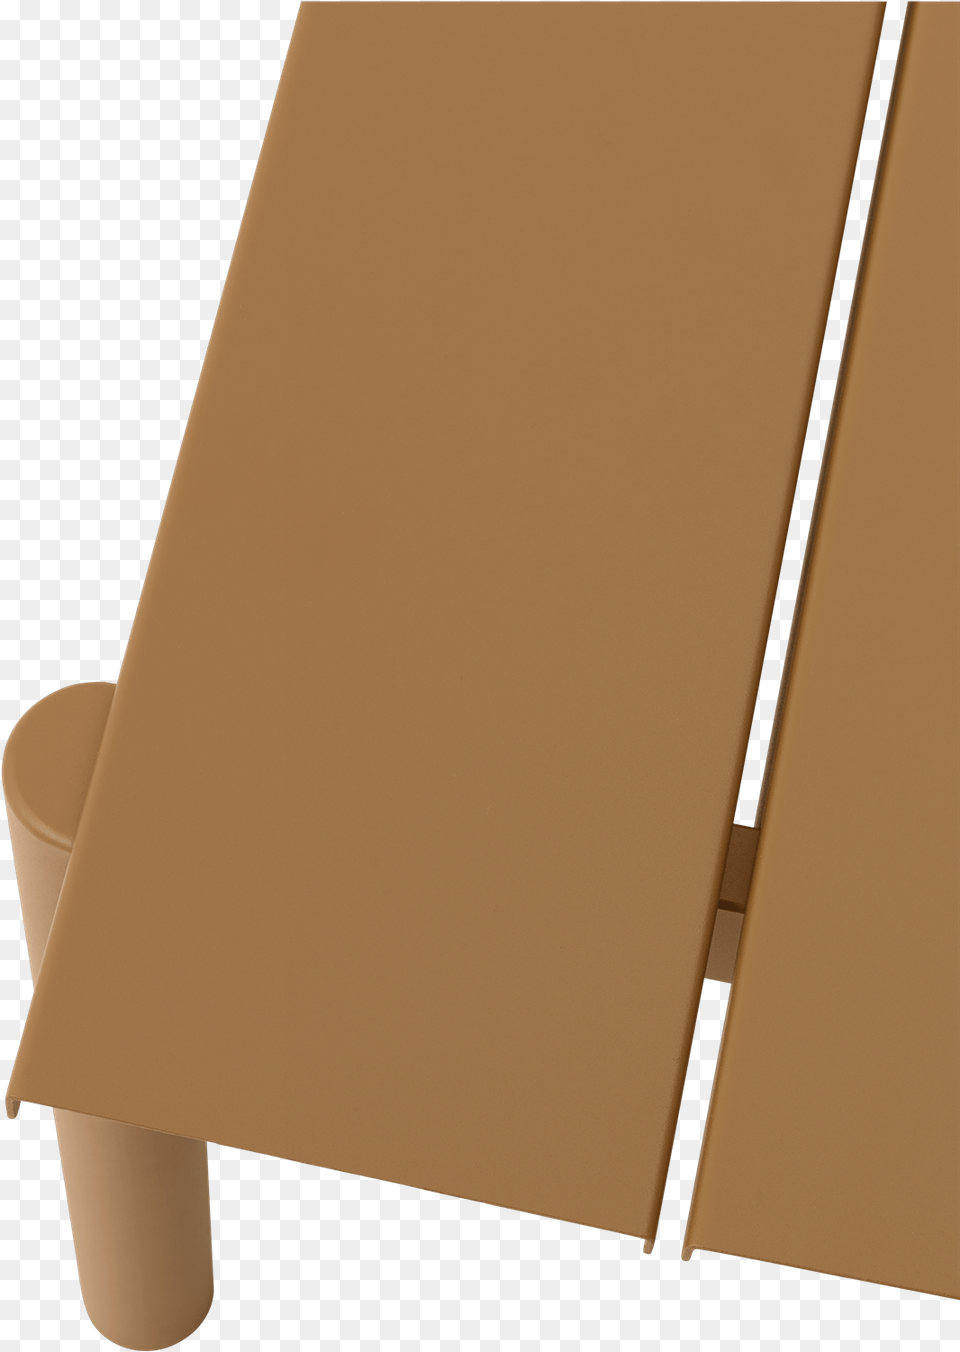 Crafted With Precision Furniture, Cardboard, Plywood, Wood, Box Png Image